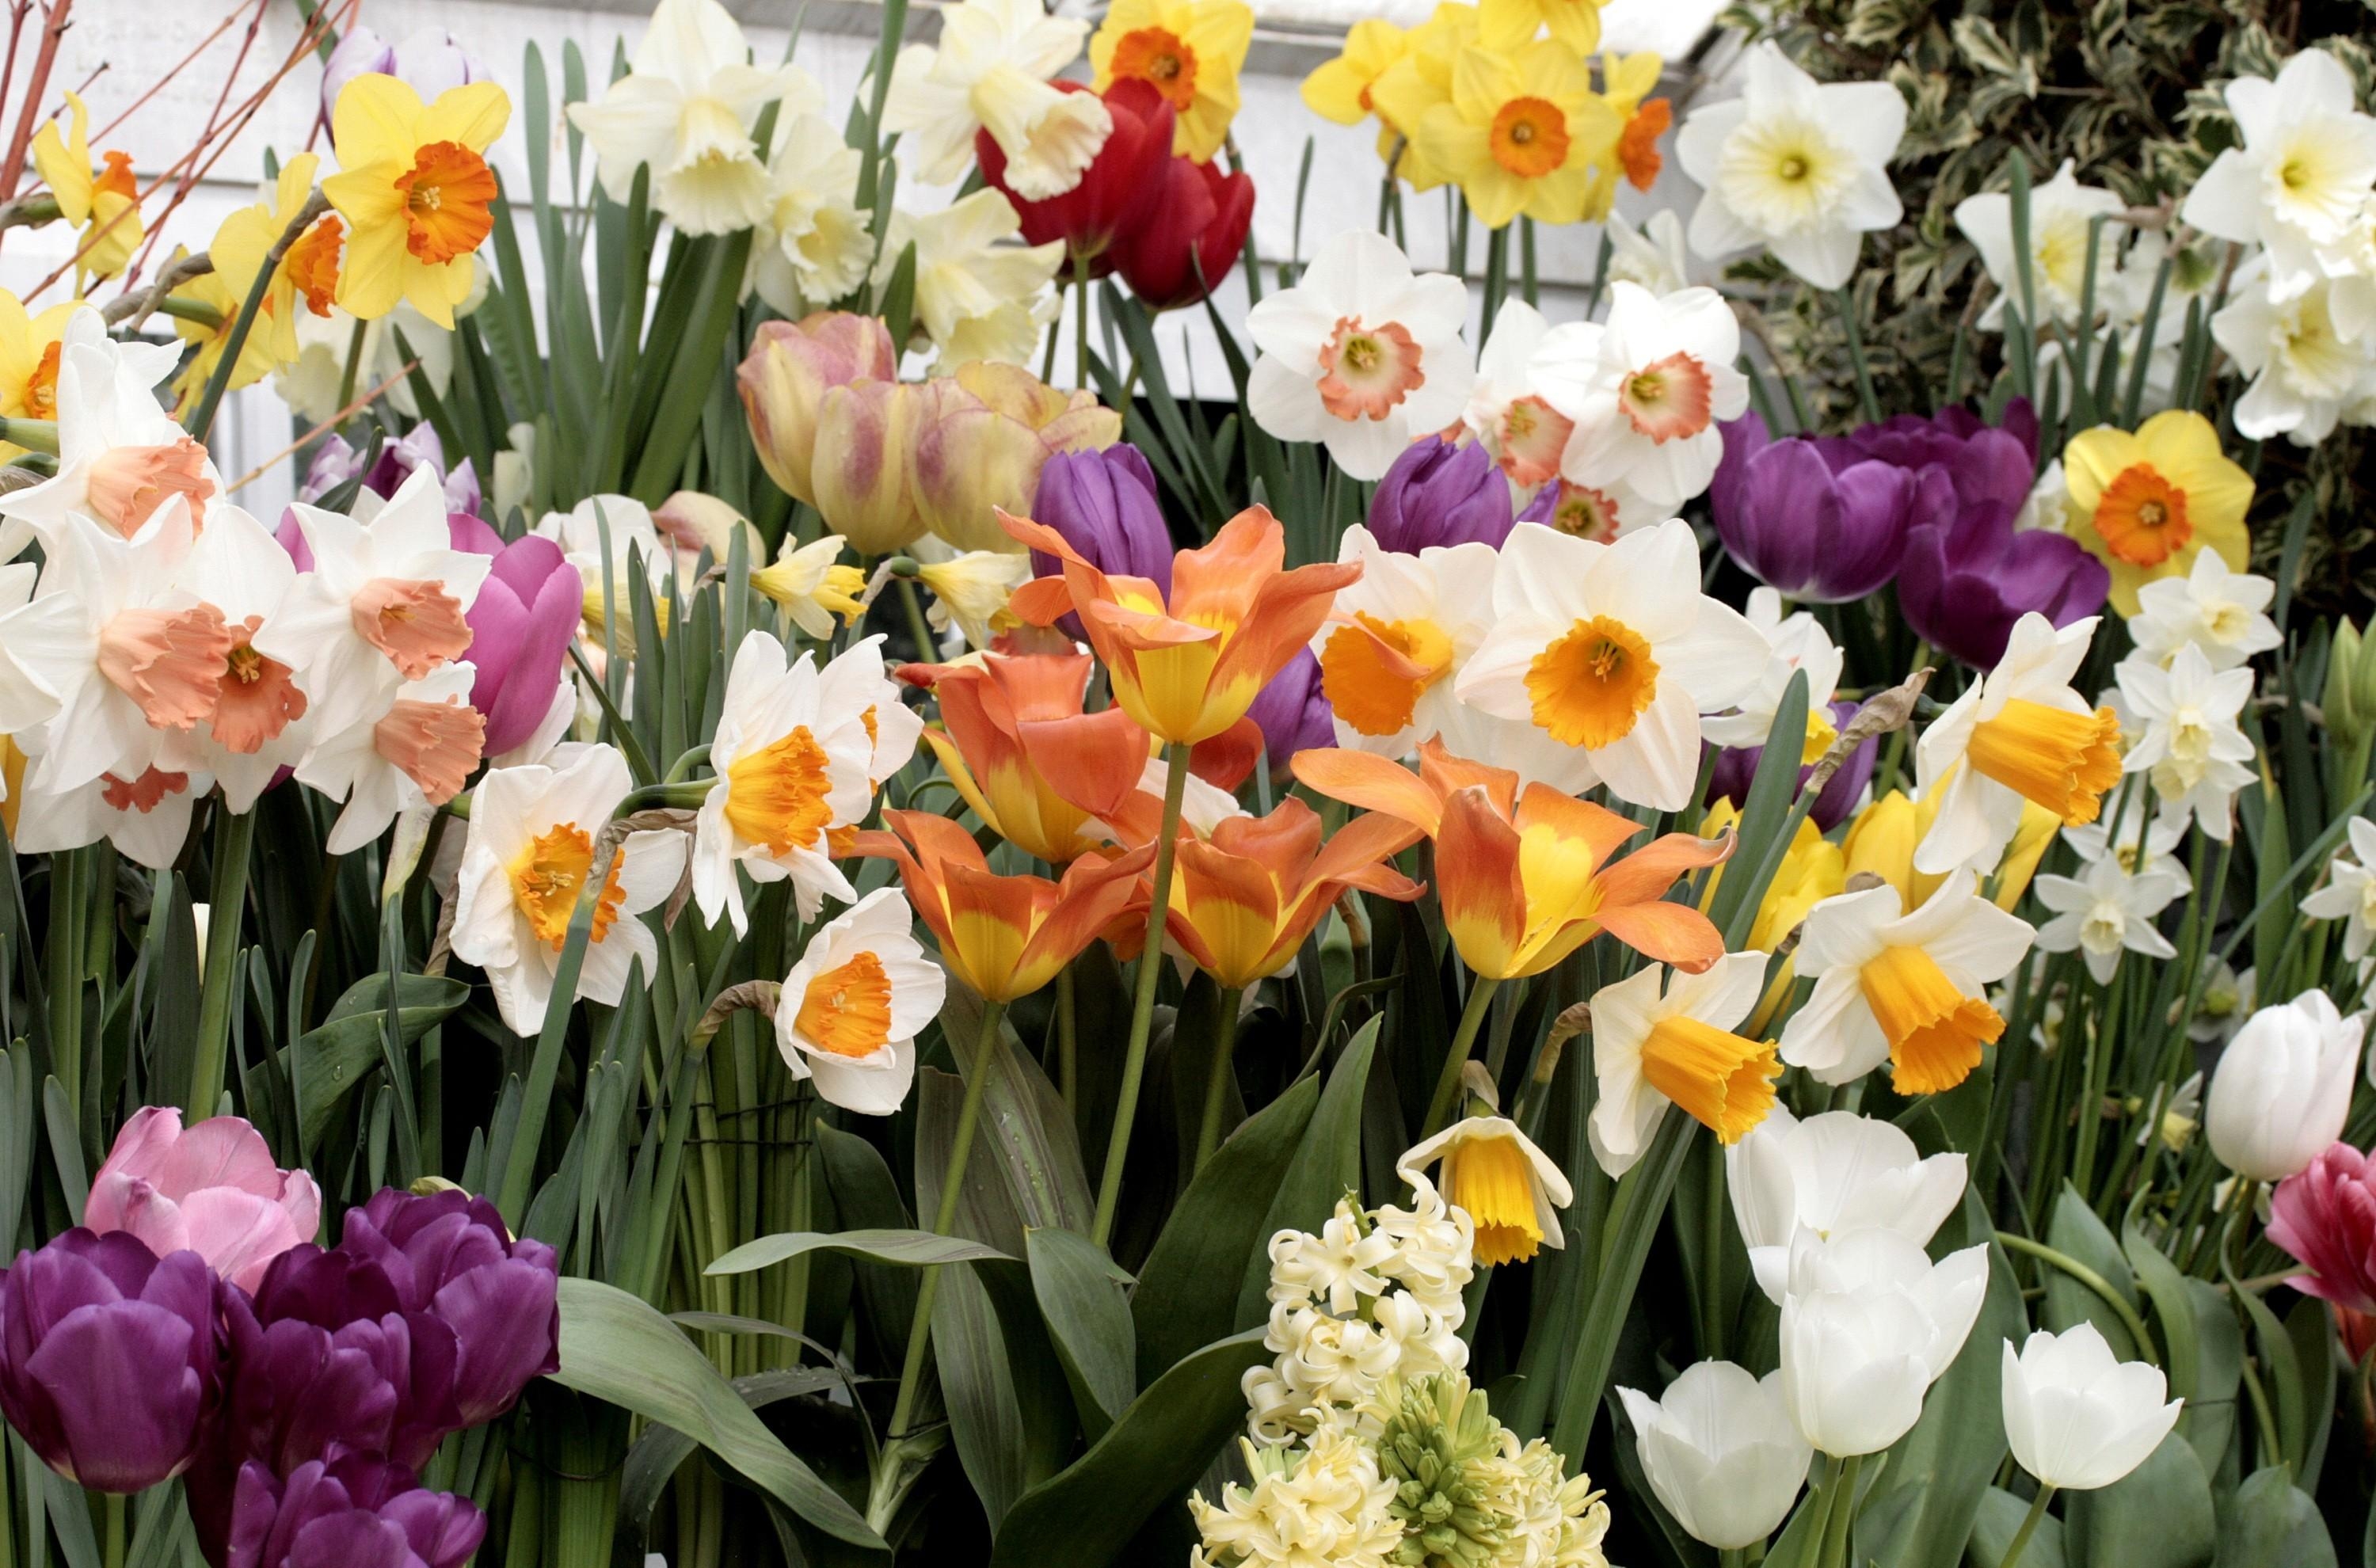 HD wallpaper flowers, tulips, narcissussi, hyacinth, flower bed, flowerbed, lots of, multitude